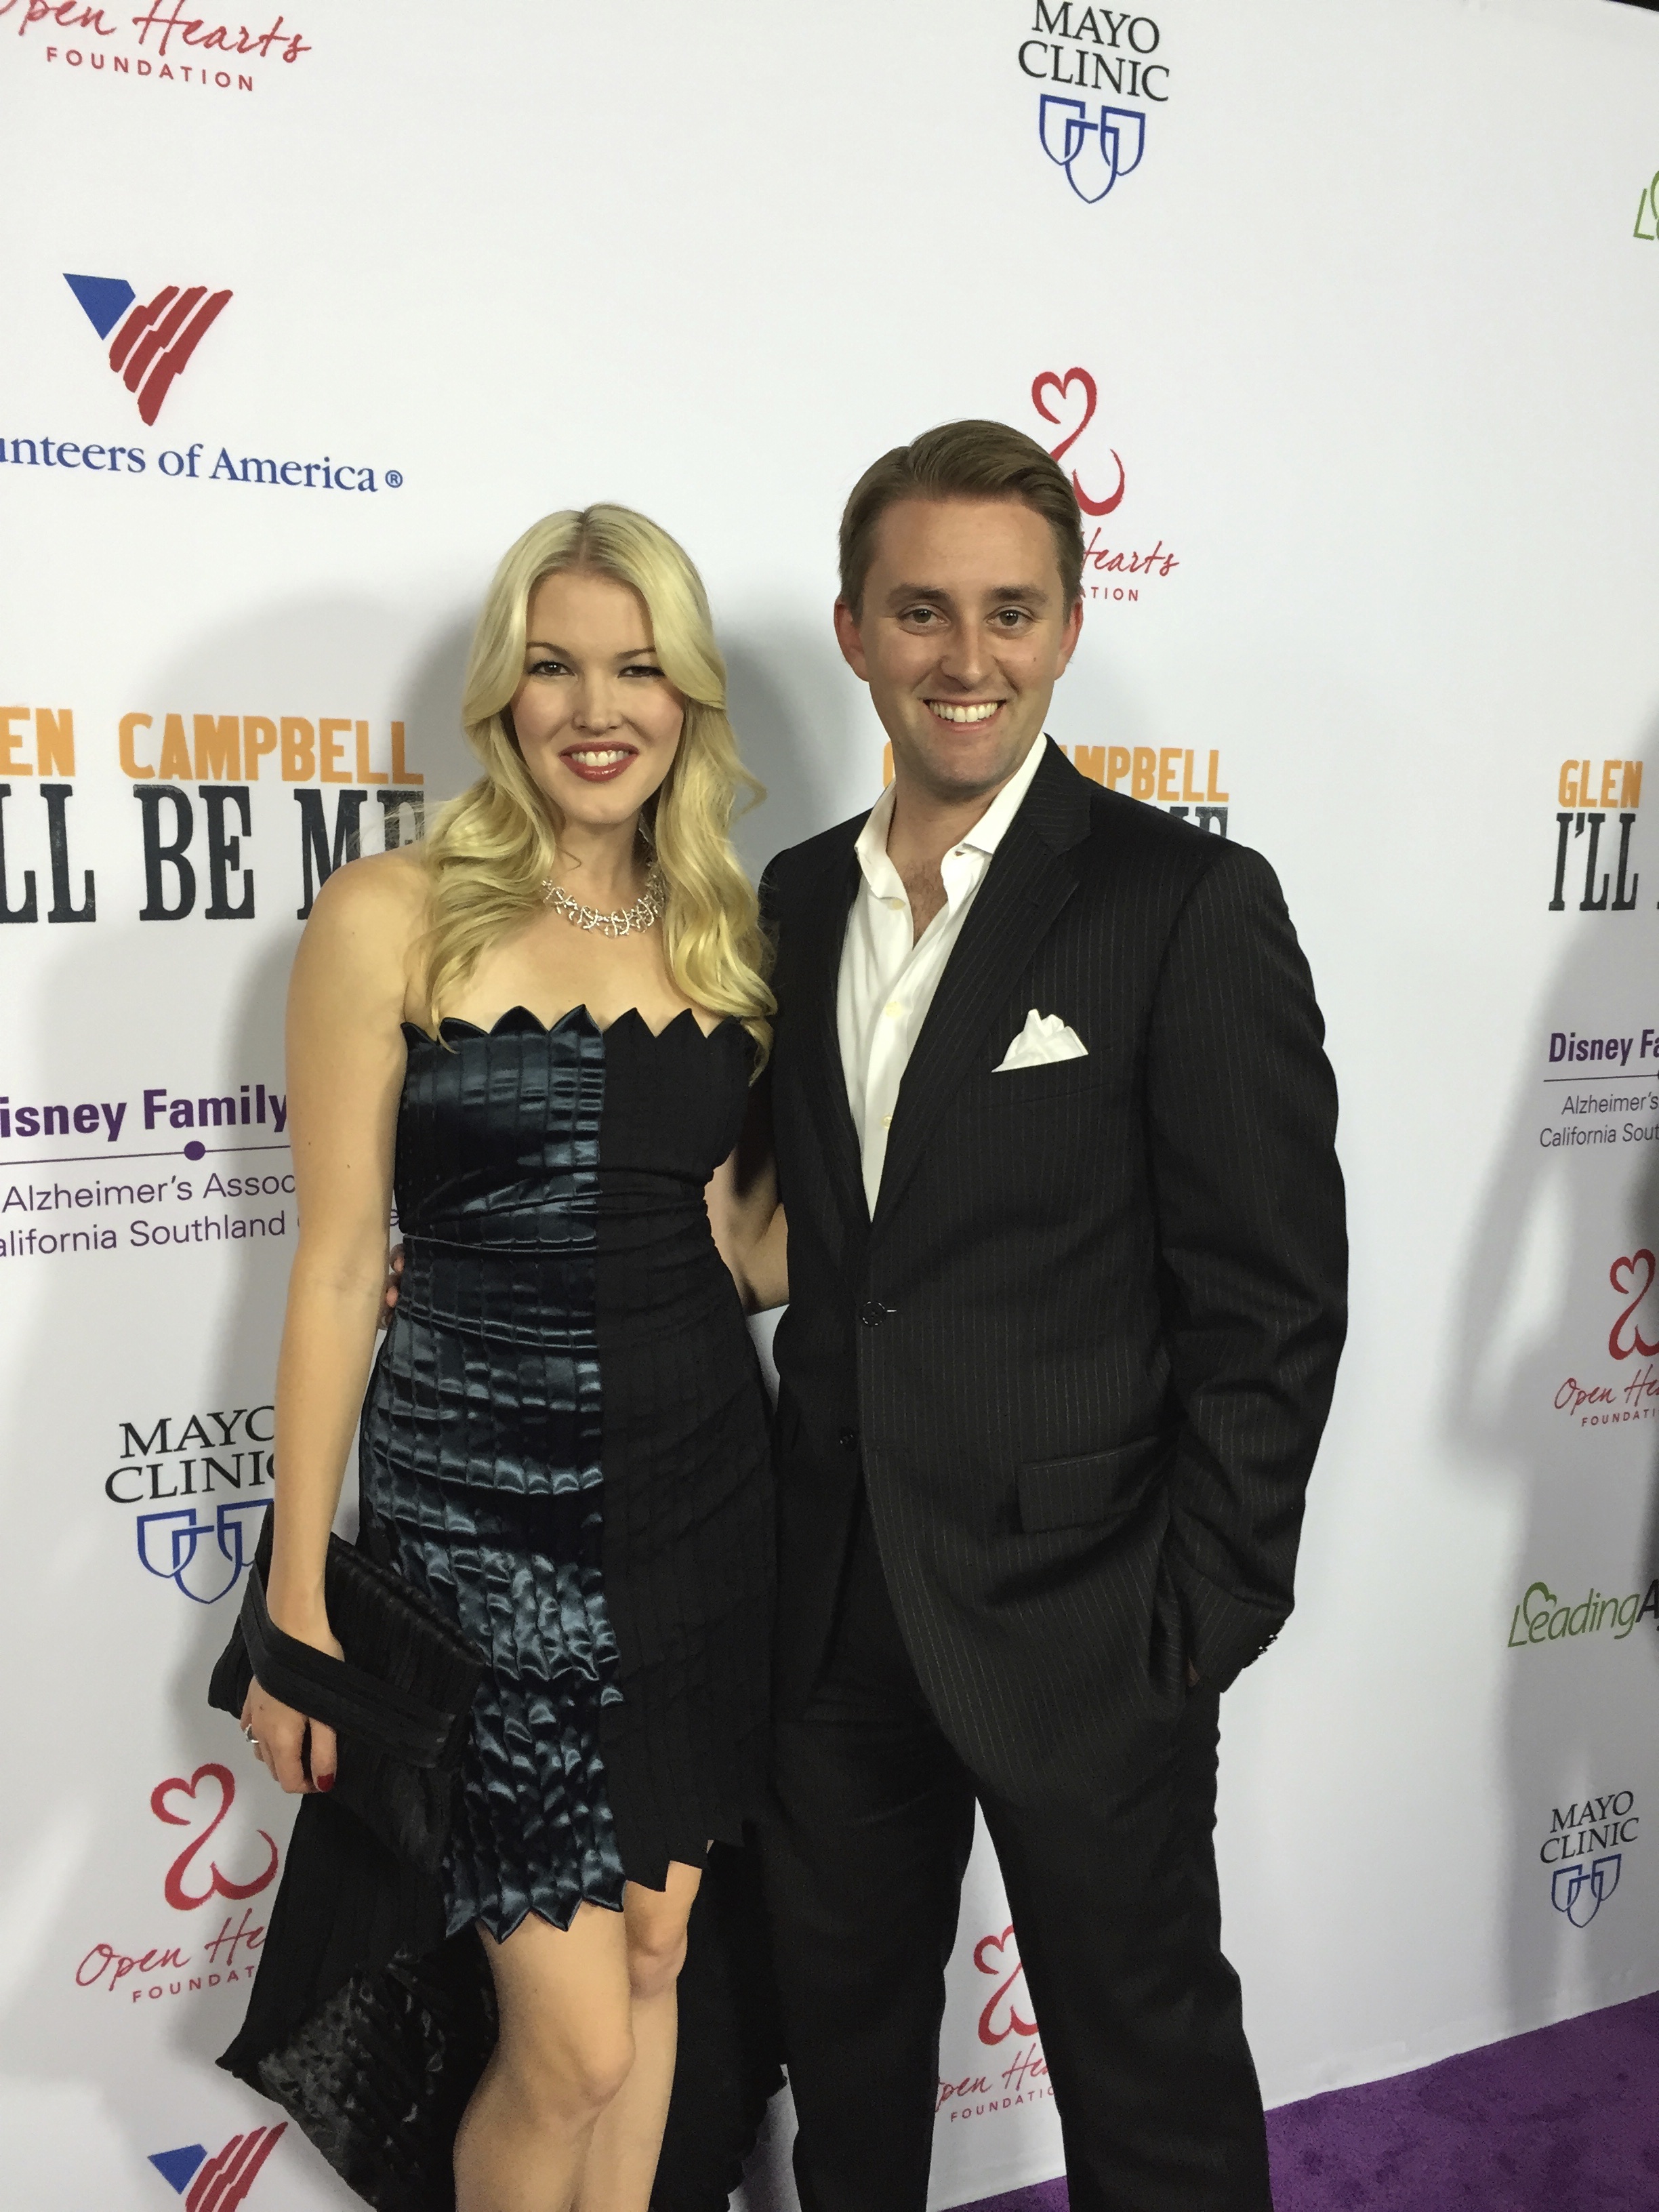 David Sheftell and Ashley Campbell at the premier of 